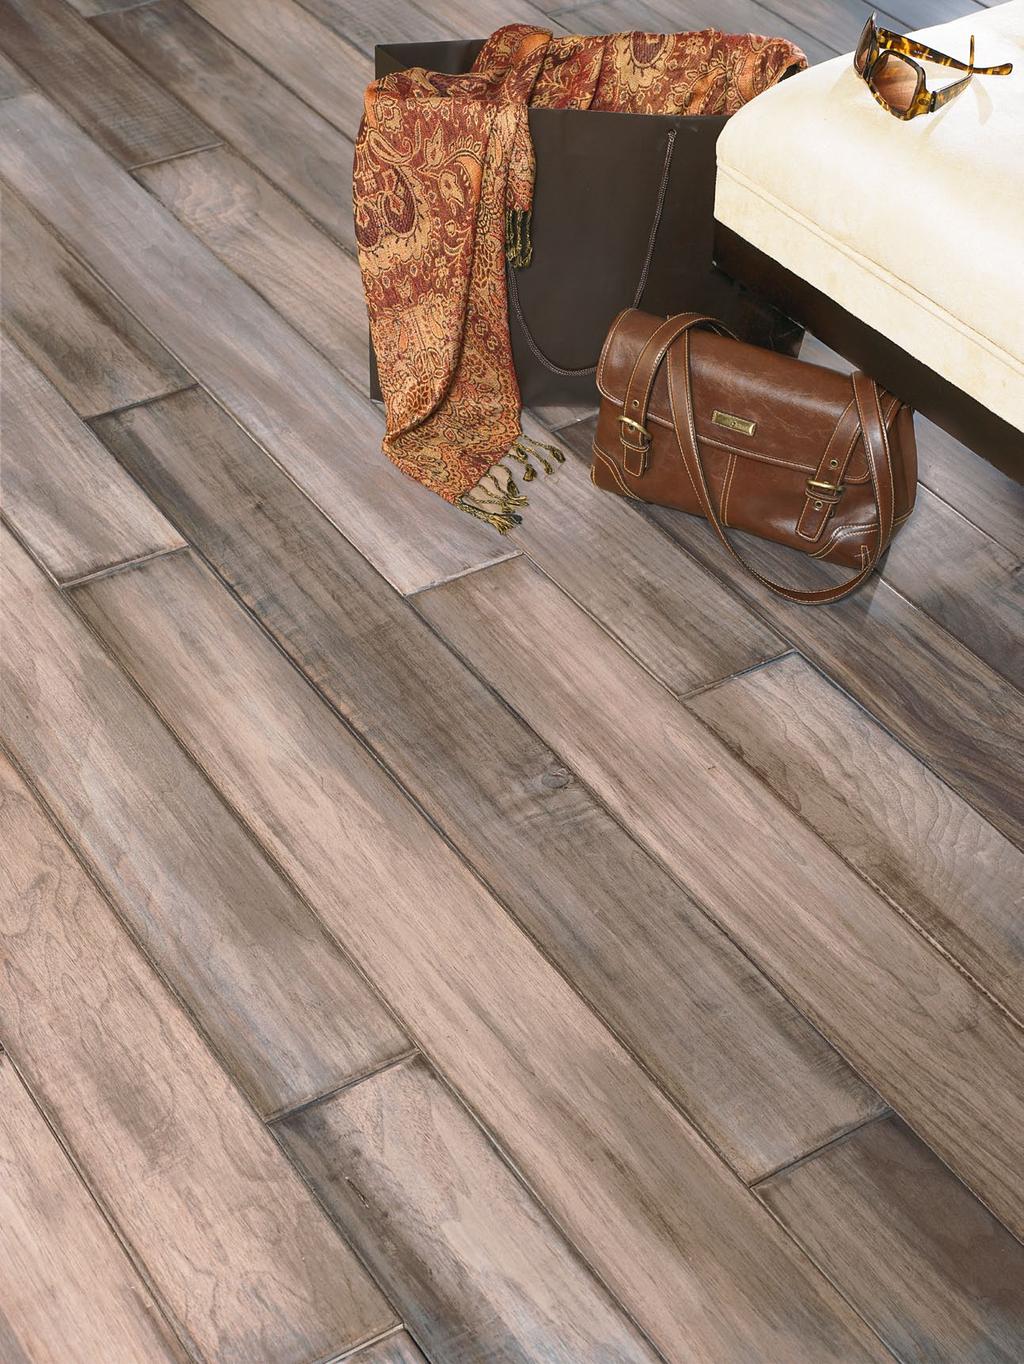 About Mannington Hardwood Flooring Designed to reflect the latest trends in American home furnishings, Mannington s engineered hardwood flooring is real hardwood engineered for superior performance.